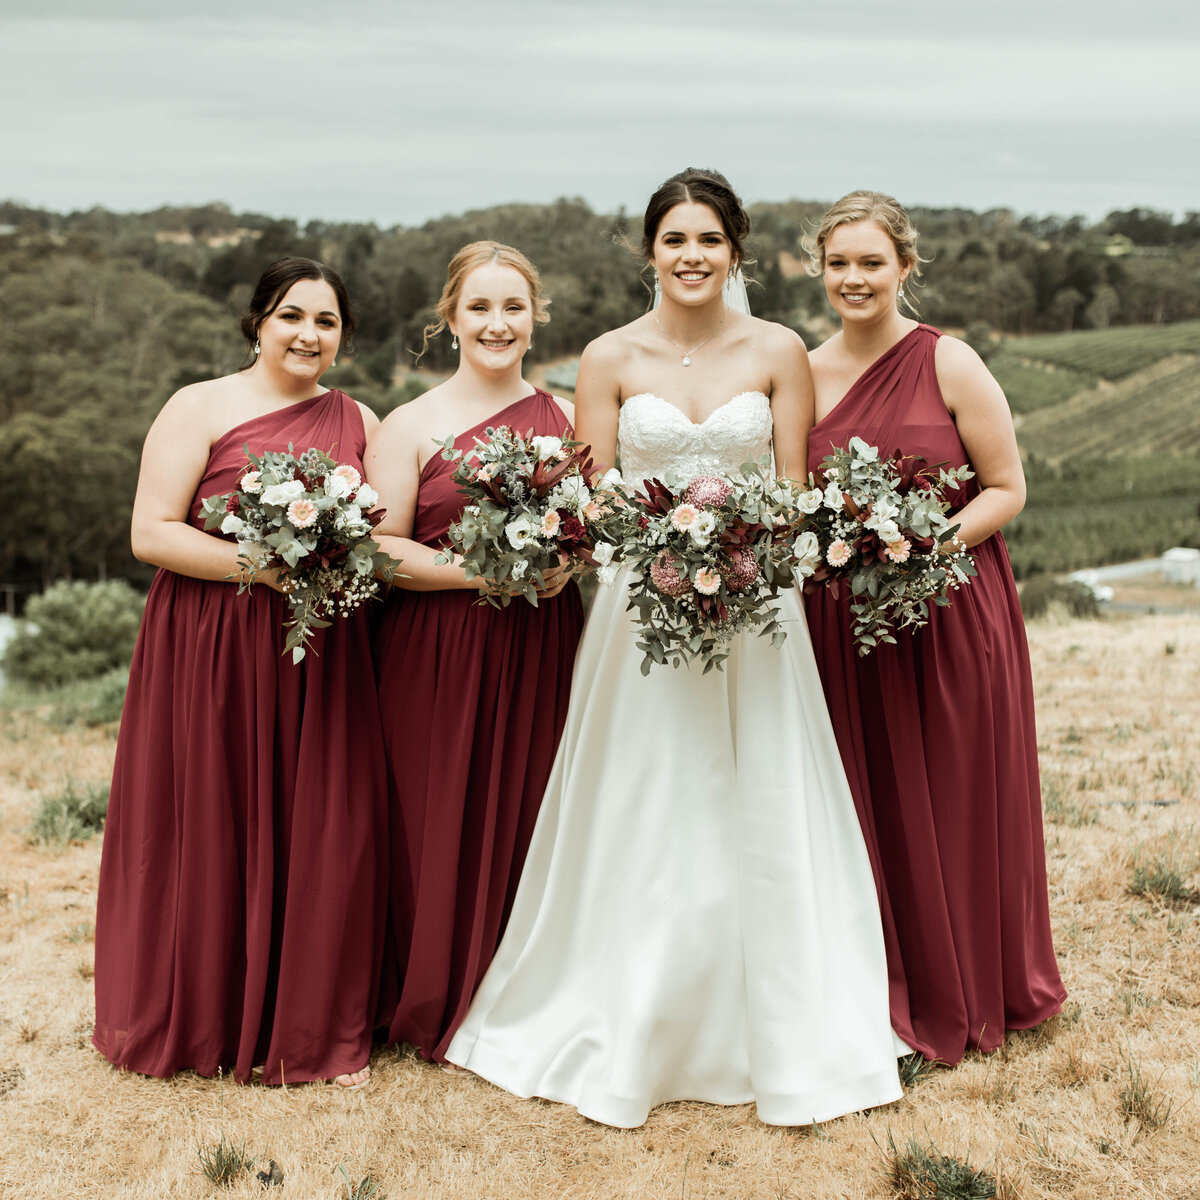 M&R-Anderson-Hill-Rexvil-Photography-Adelaide-Wedding-Photographer-224